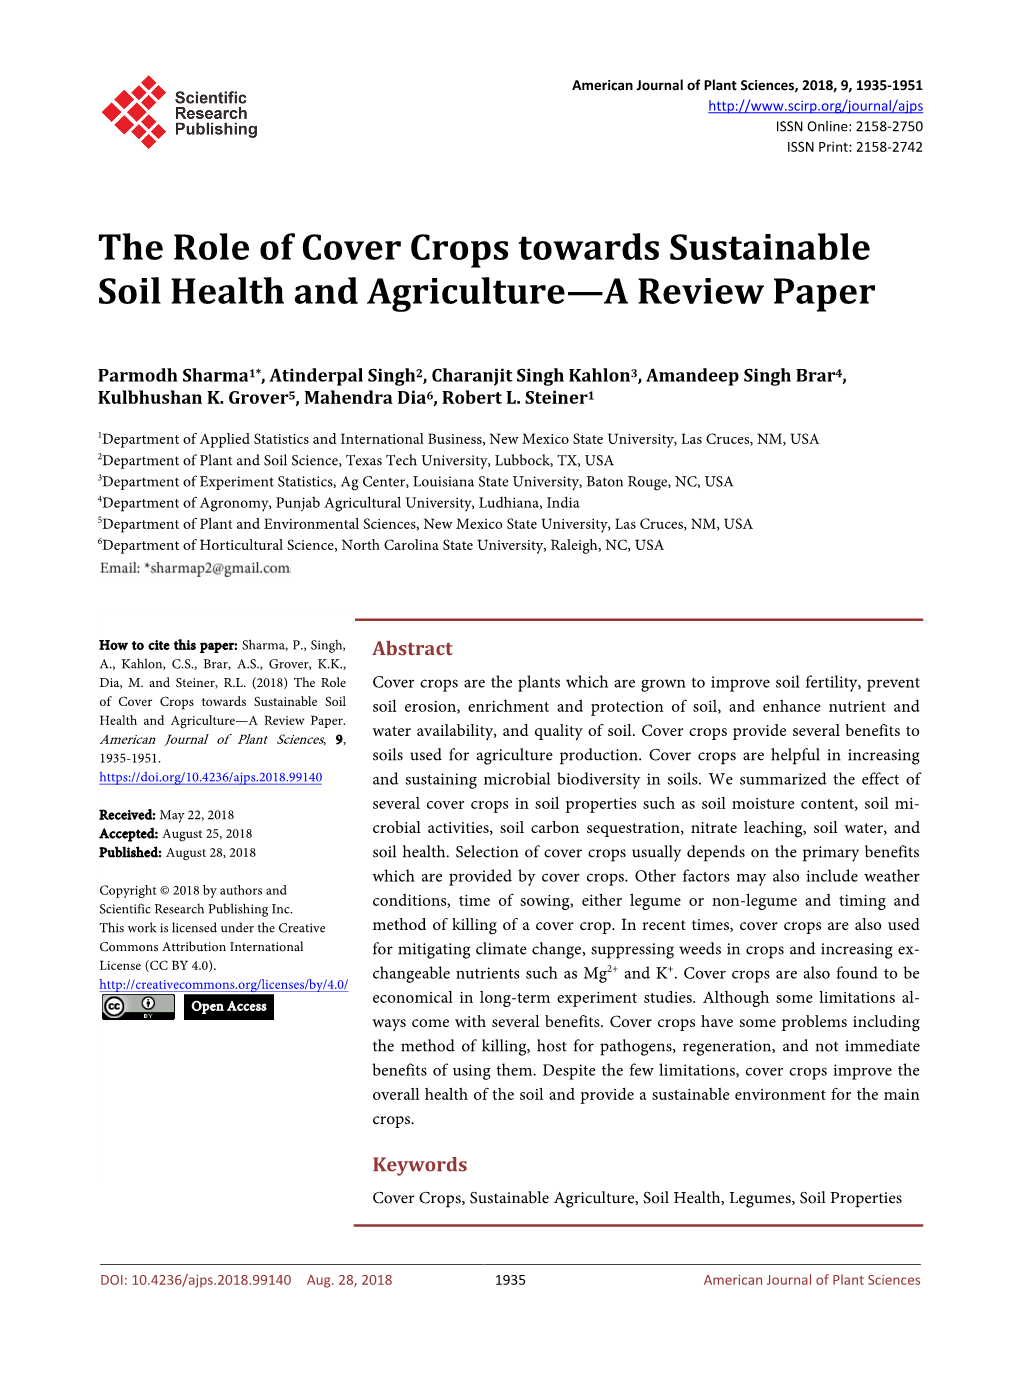 The Role of Cover Crops Towards Sustainable Soil Health and Agriculture—A Review Paper